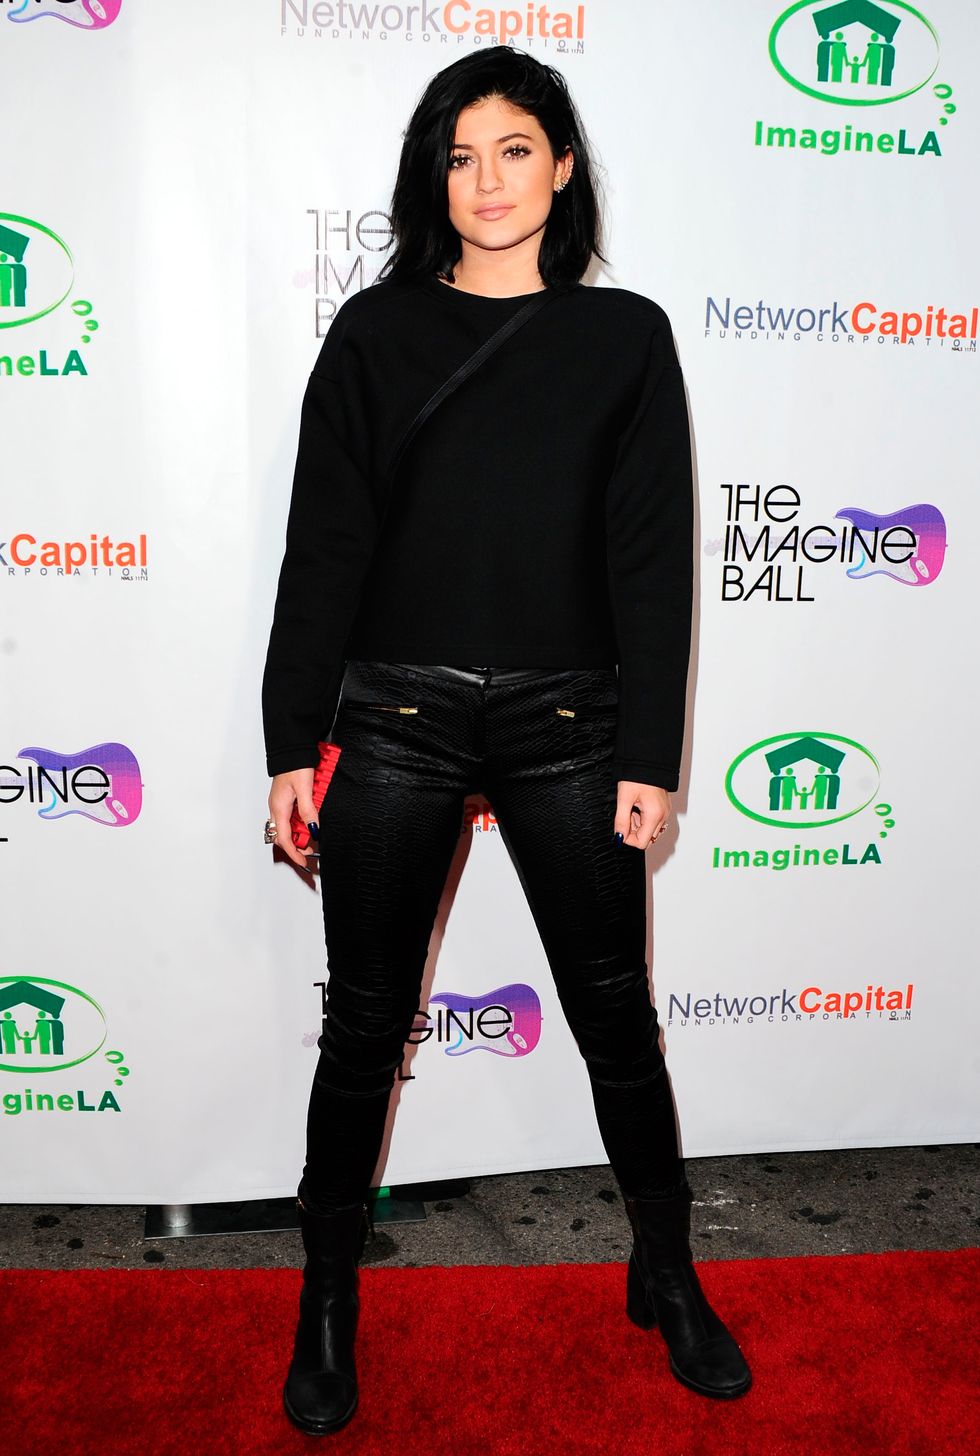 Kylie Jenner looking casual on red carpet in black - celebrity style photos - fashion - cosmopolitan.co.uk